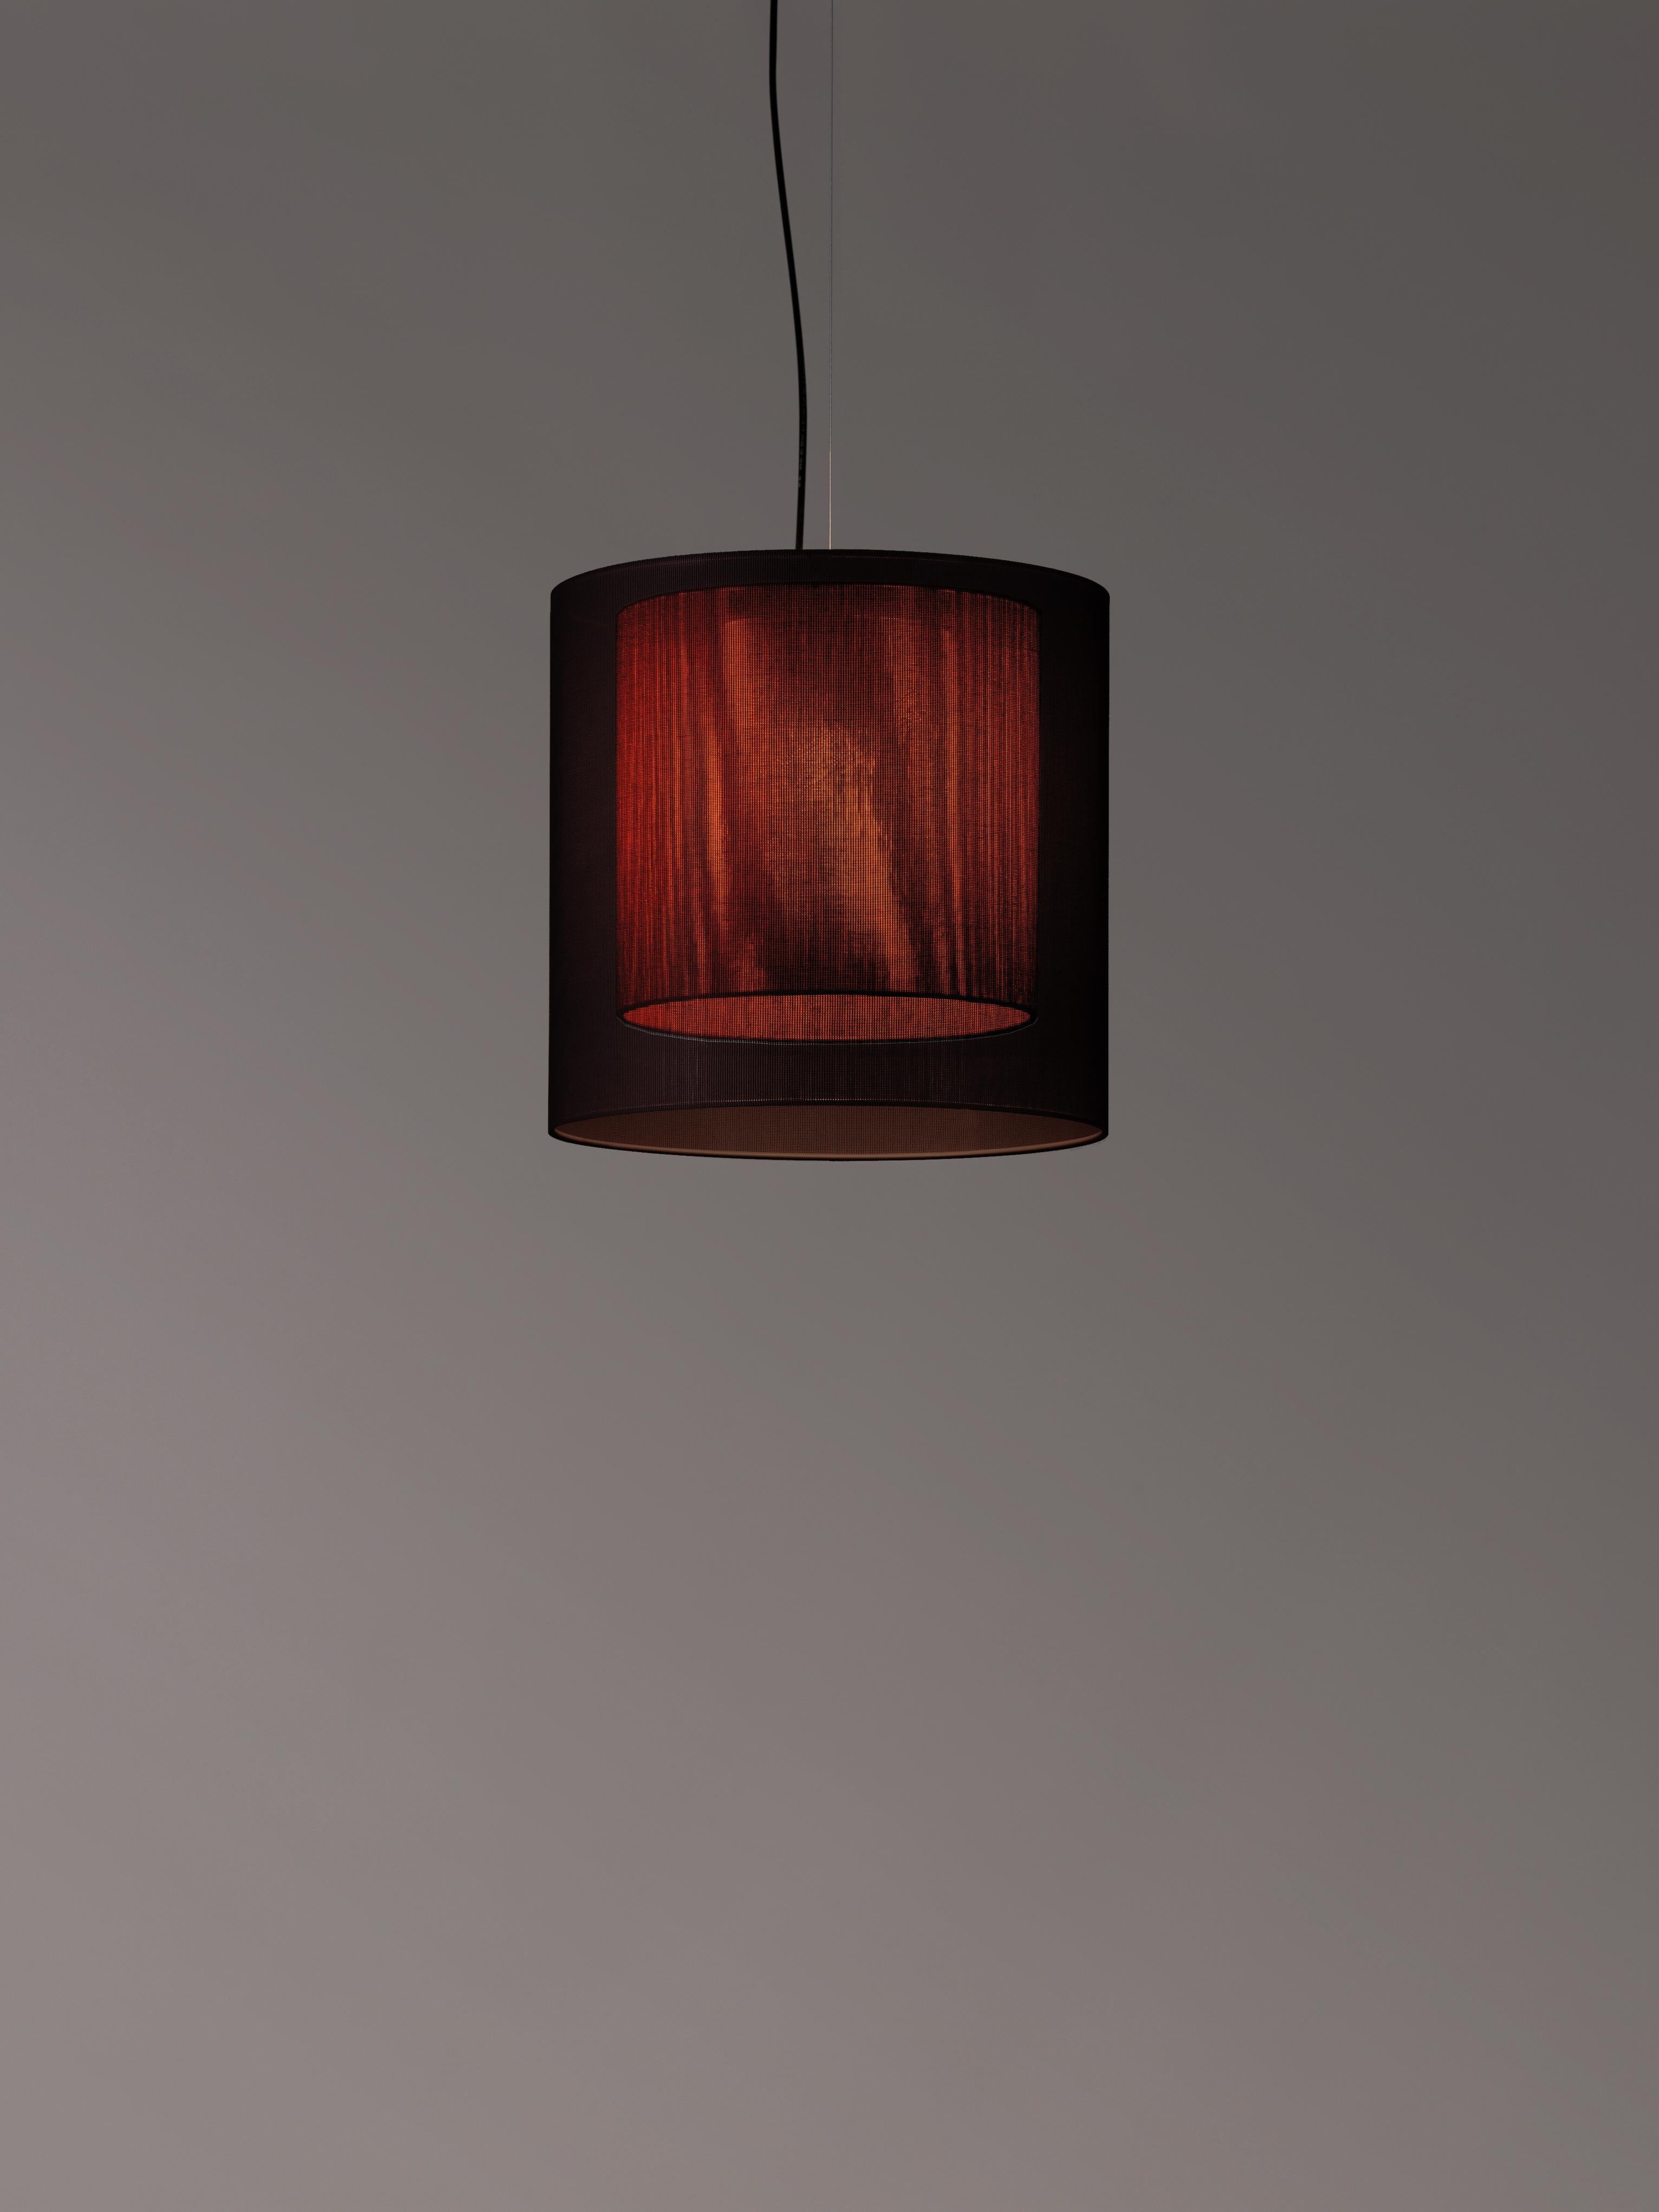 Black and red moaré ms pendant lamp by Antoni Arola
Dimensions: D 46 x H 45 cm
Materials: Metal, polyester.
Available in other colors and sizes.

Moaré’s multiple combinations of formats and colours make it highly versatile. The series takes